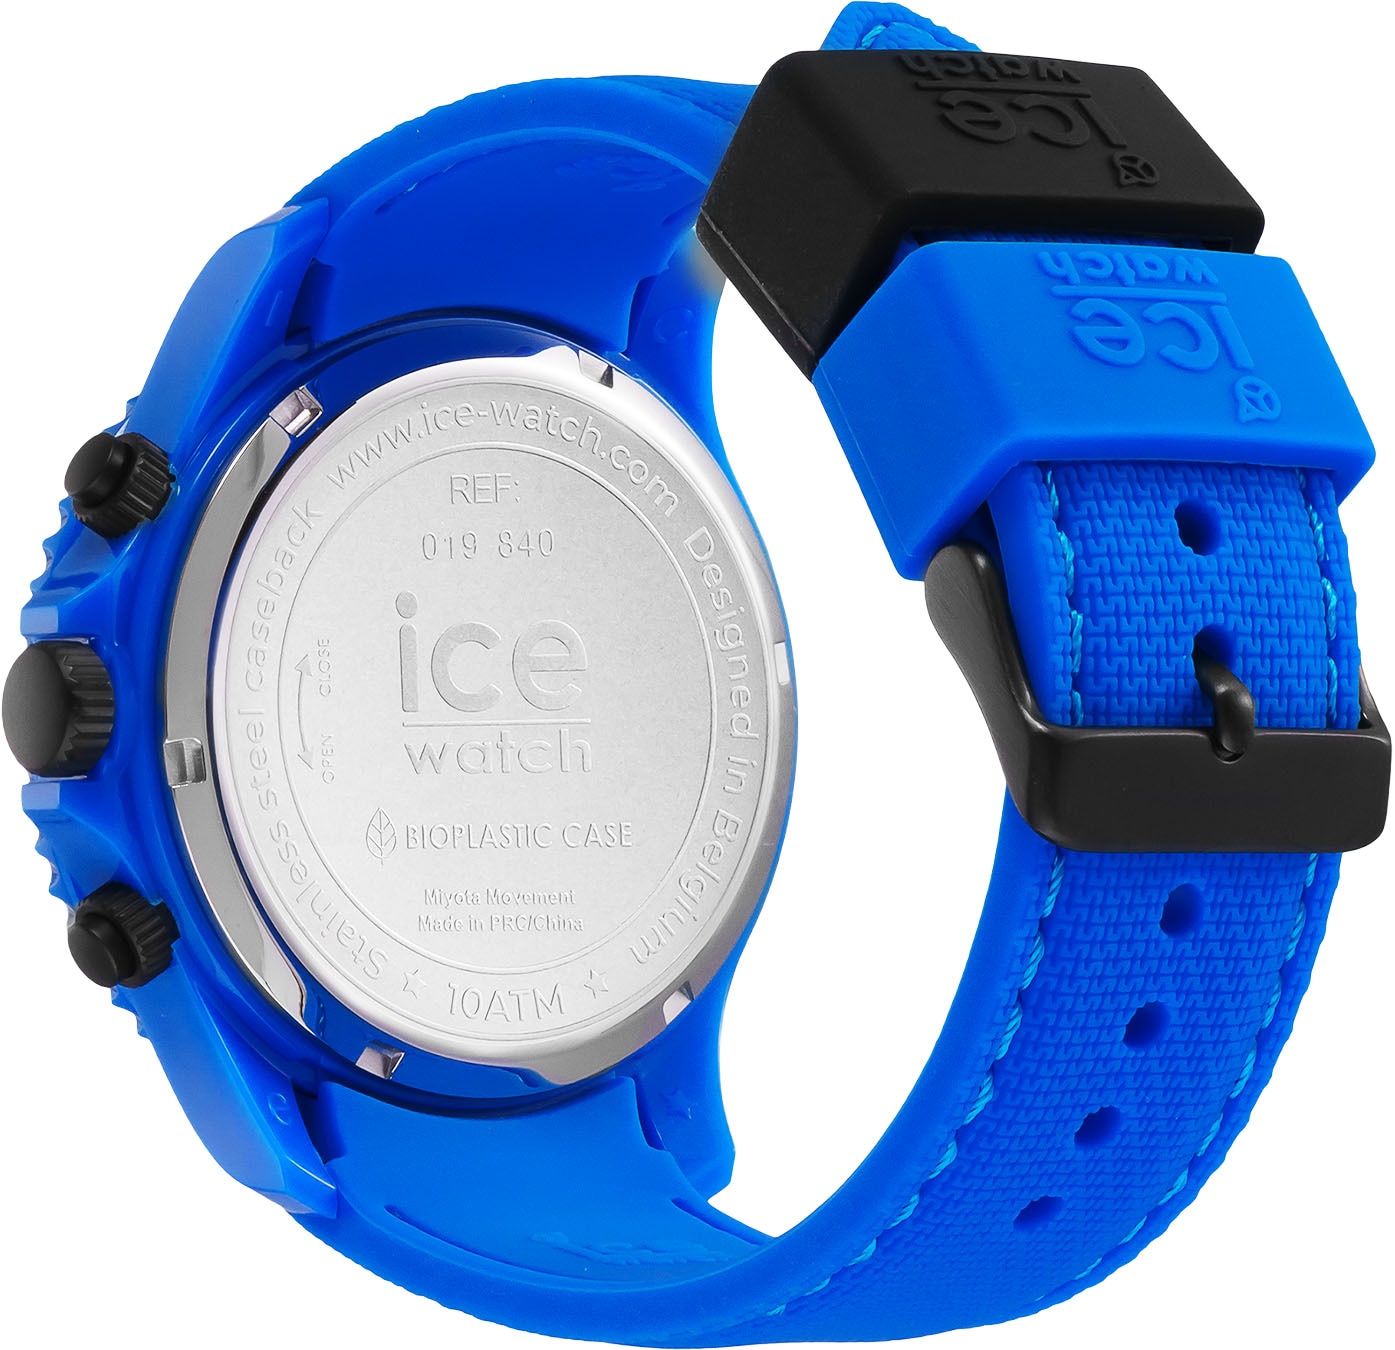 ice-watch Chronograph »ICE CH, Neon - chrono blue bei OTTO - shoppen - 019840« online Large